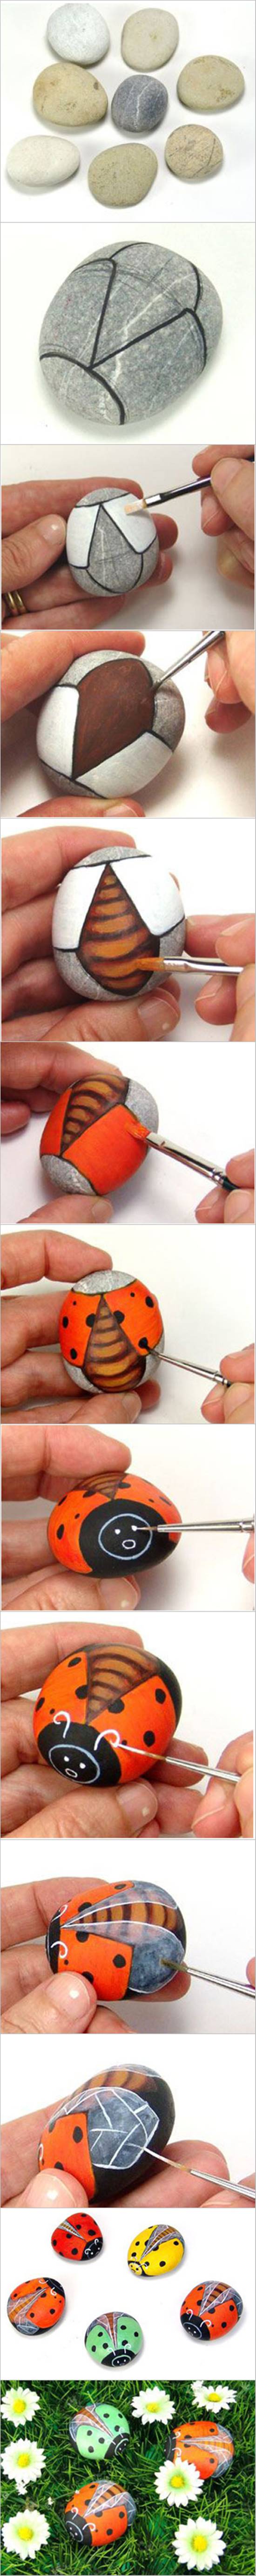 How to DIY Painted Pebble Ladybugs